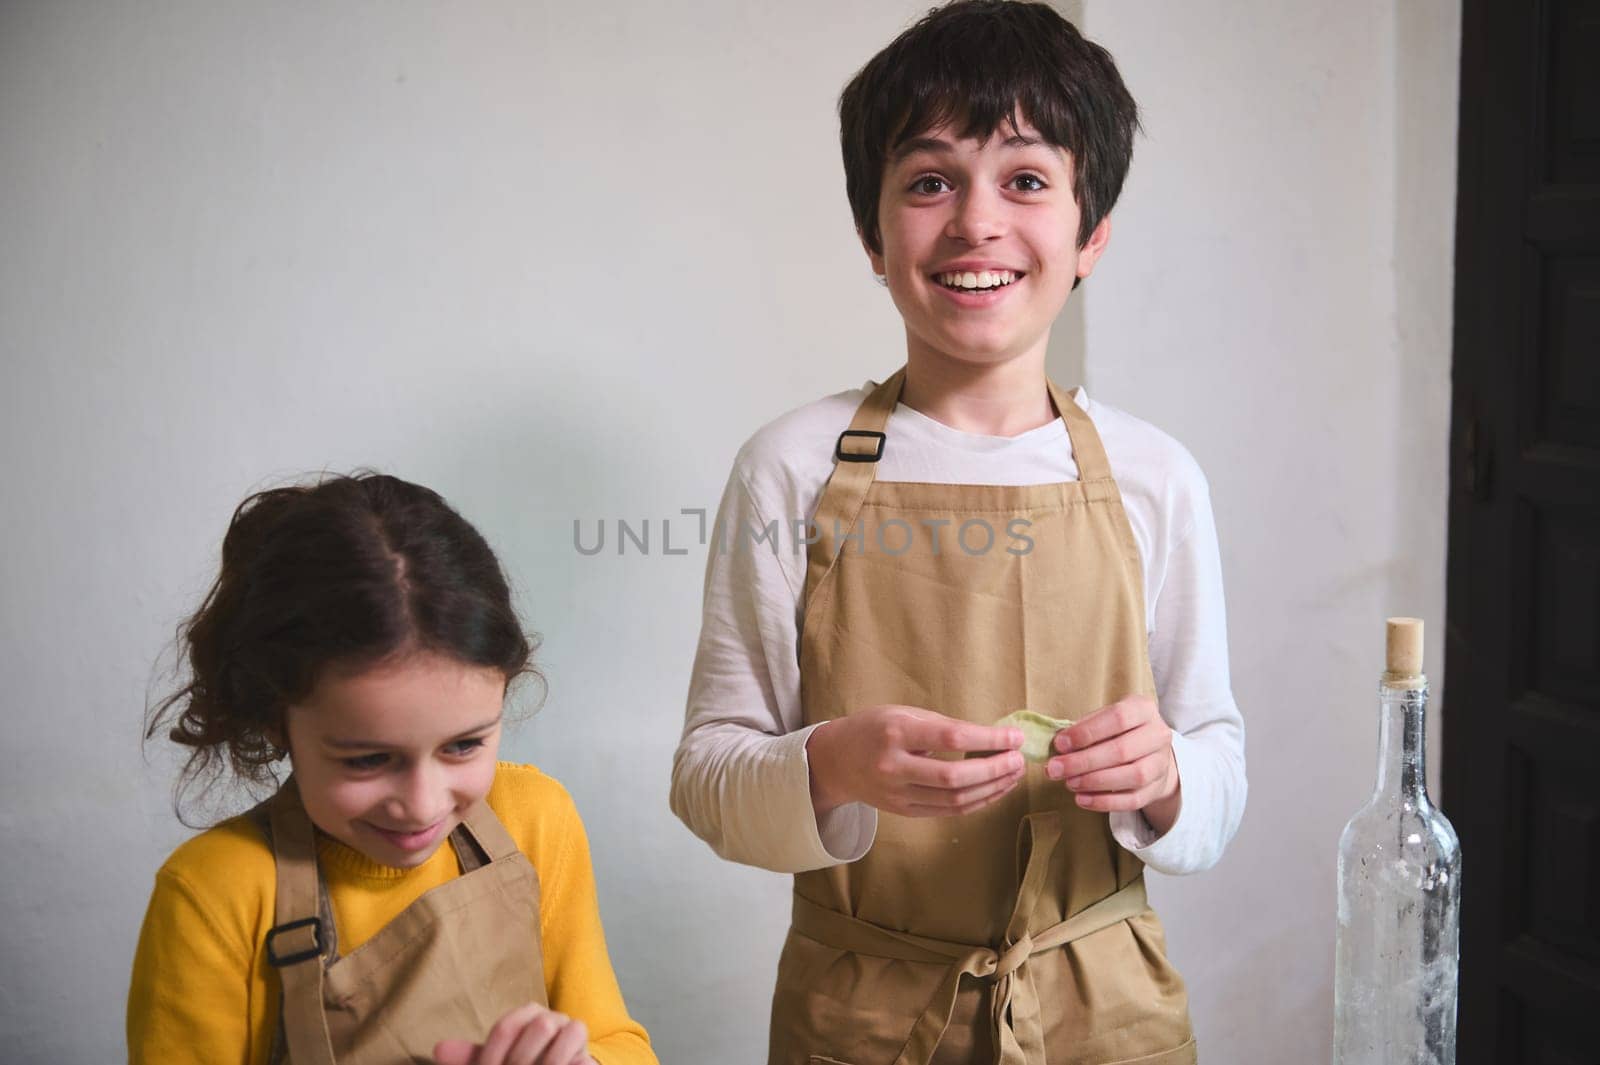 Authentic portrait of two adorable smiling kids making homemade dumplings at home kitchen, standing against white wall background by artgf